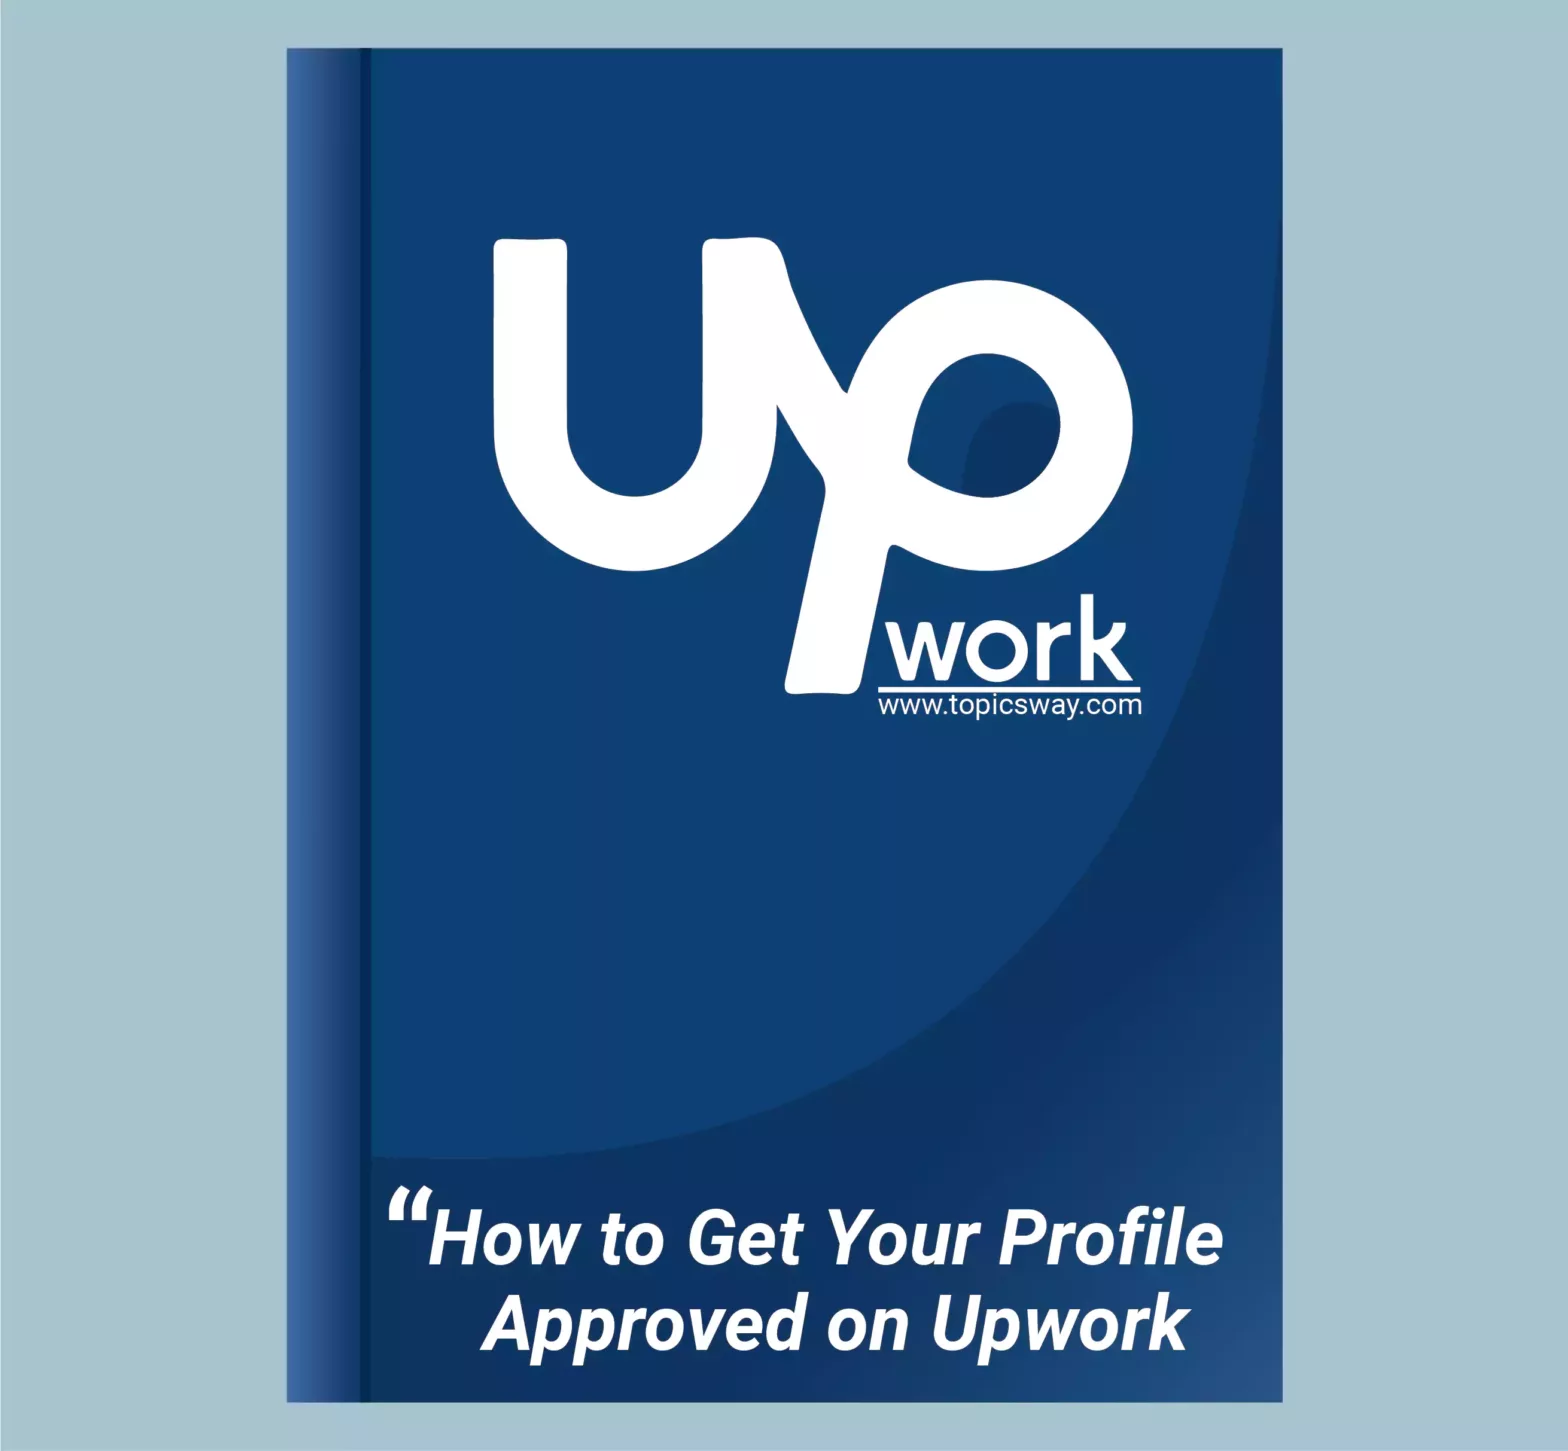 How to Get Your Profile Approved on Upwork